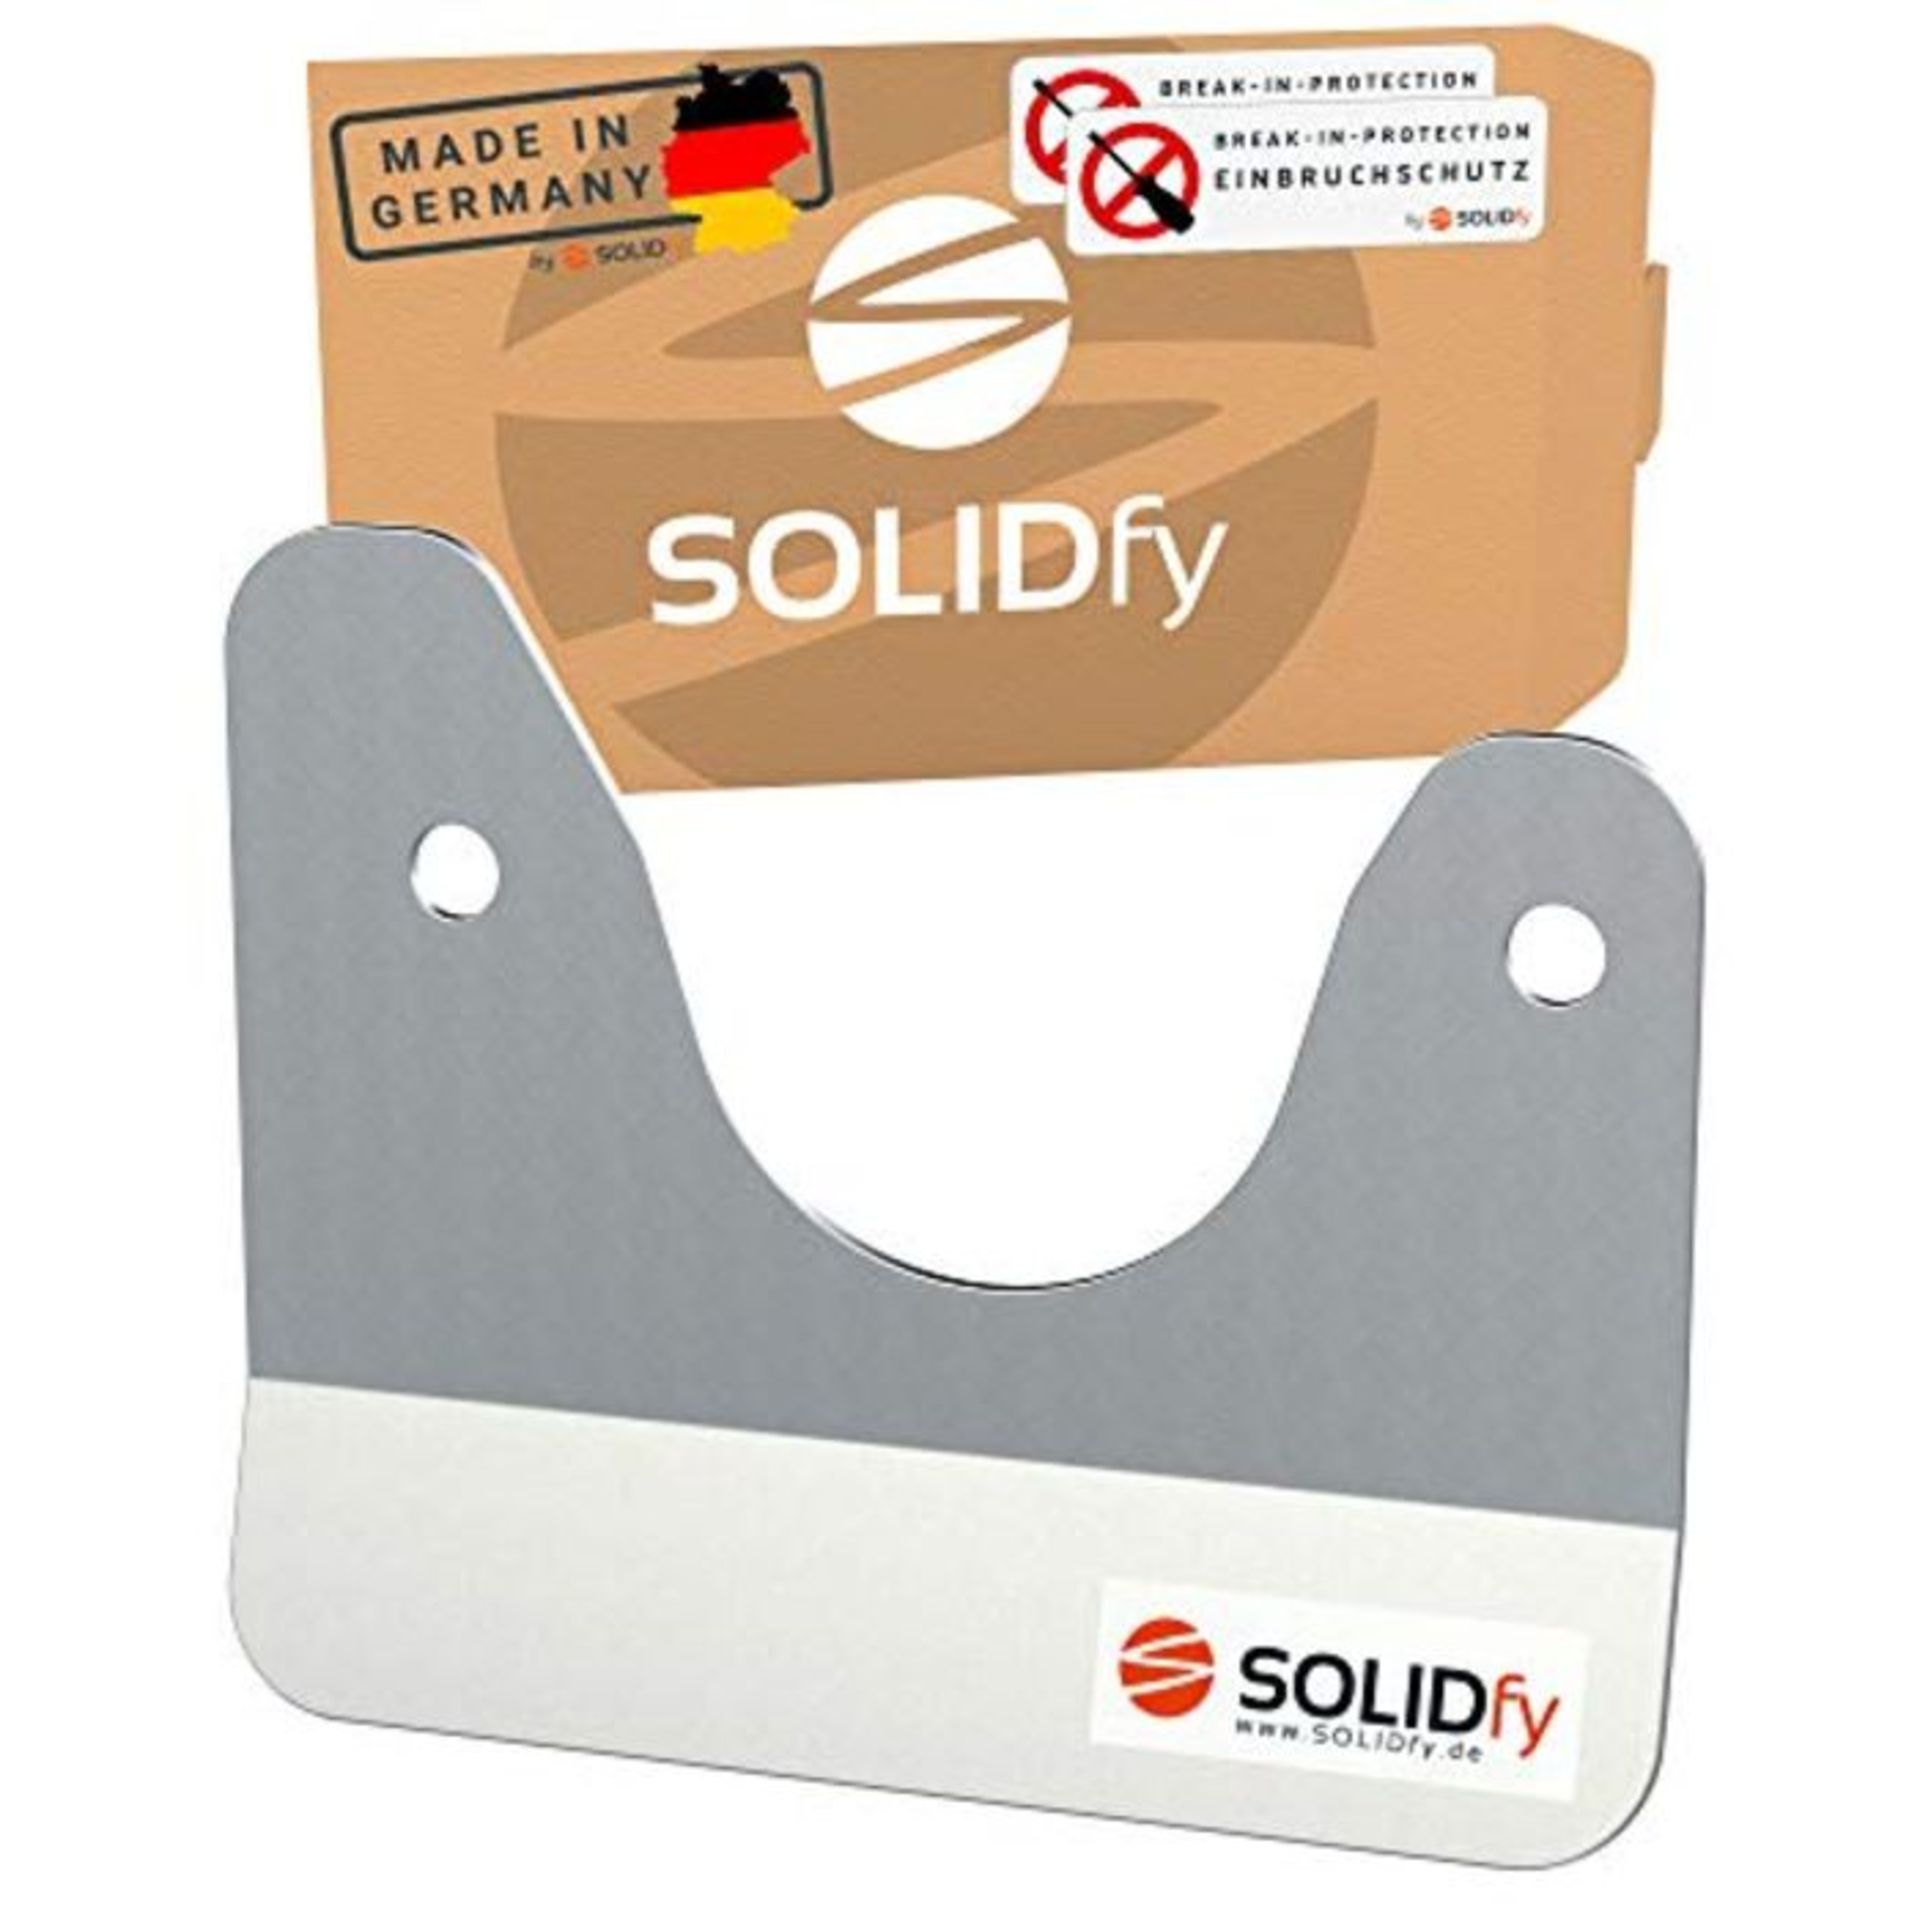 SOLIDfy® break-in protection, rear door prick stop lock made of stainless steel for D